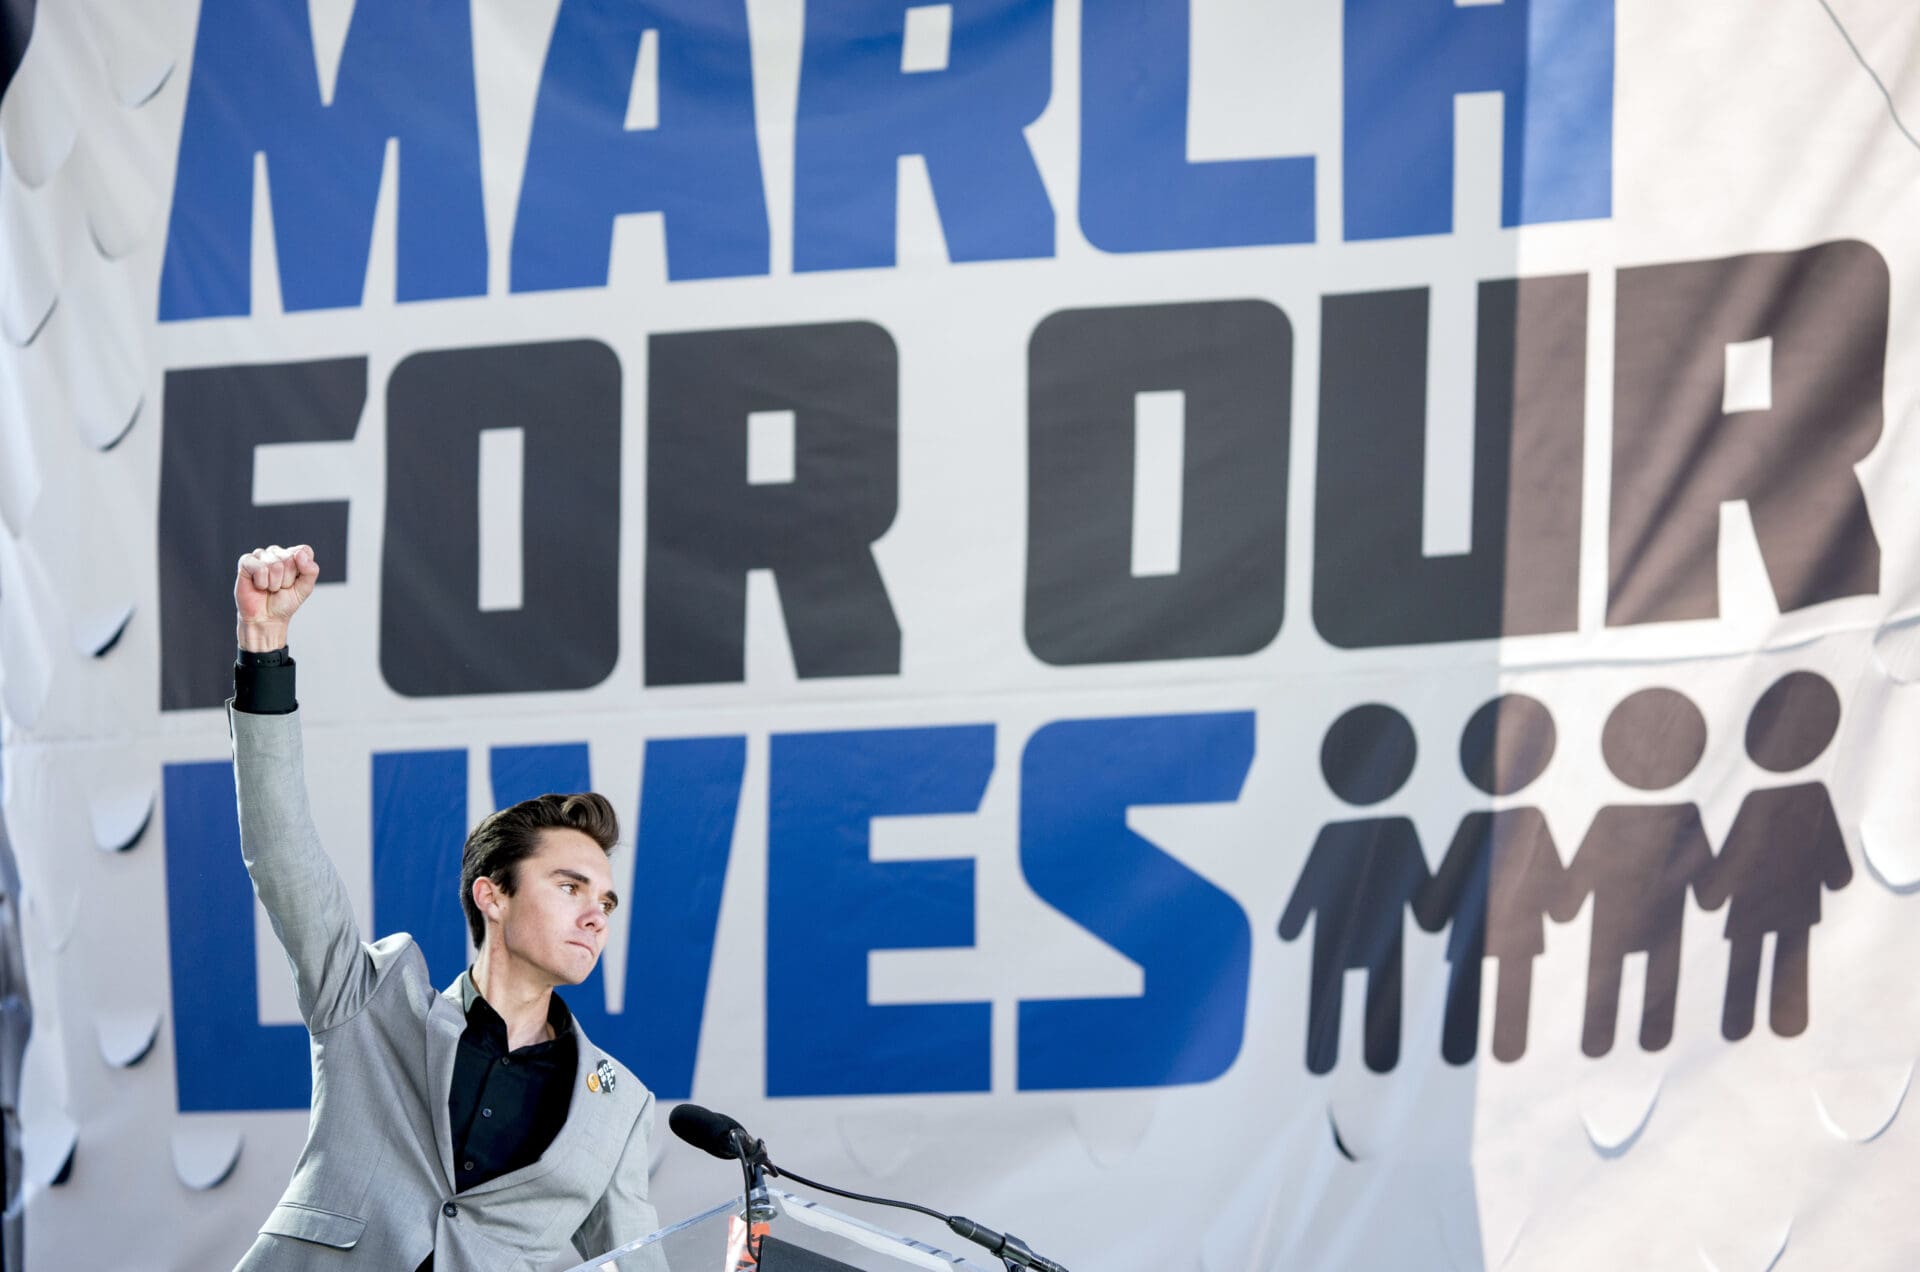 David Hogg march for our lives